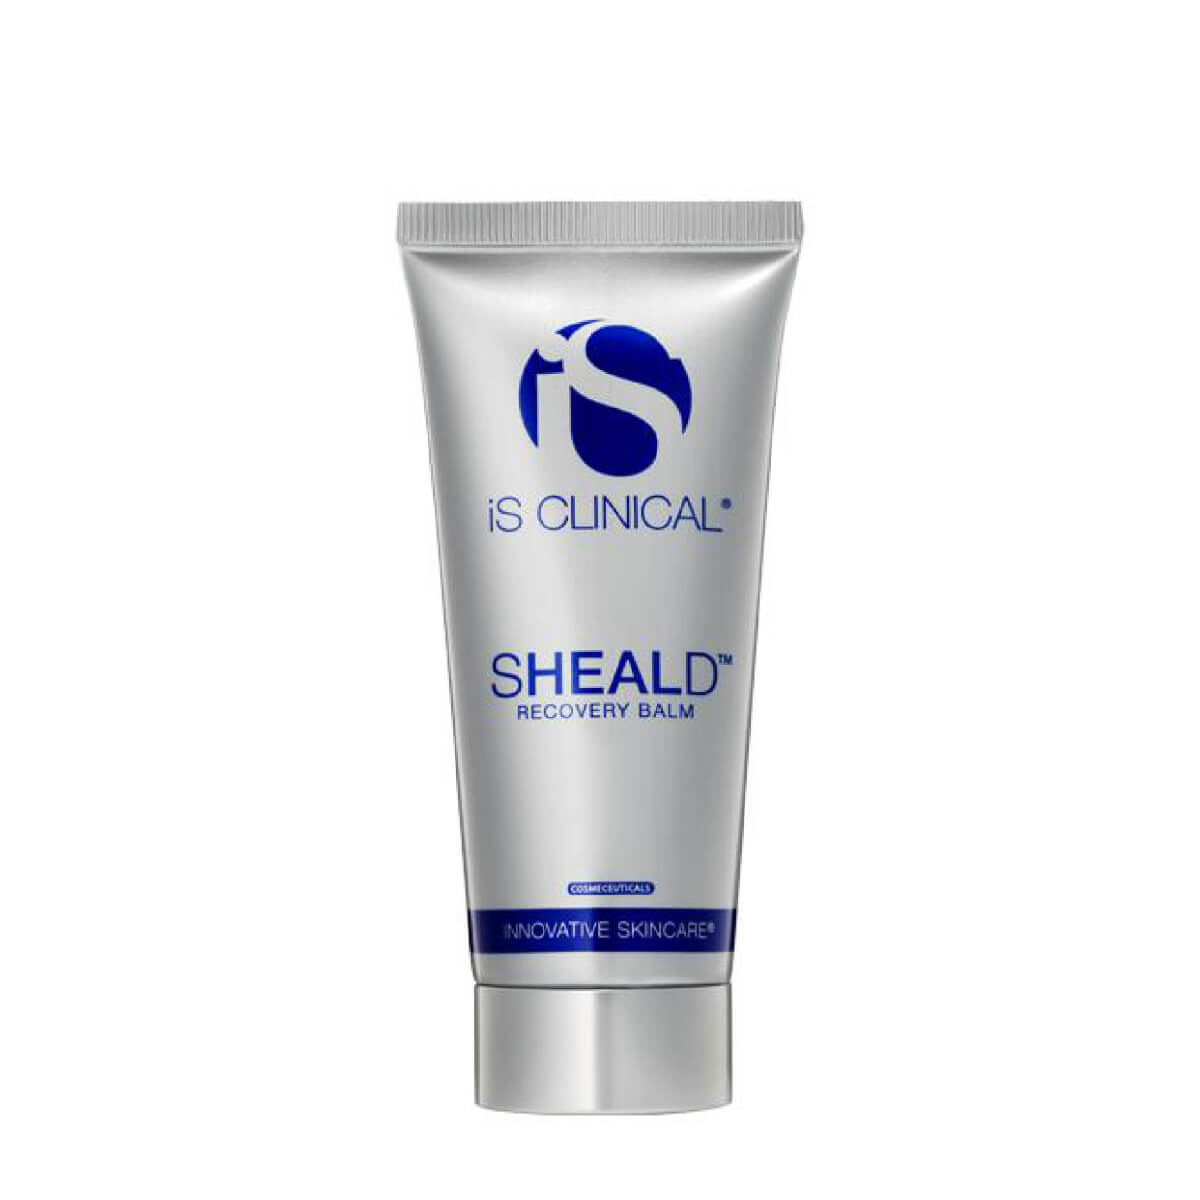 iS Clinical - Sheald Recovery Balm 60g